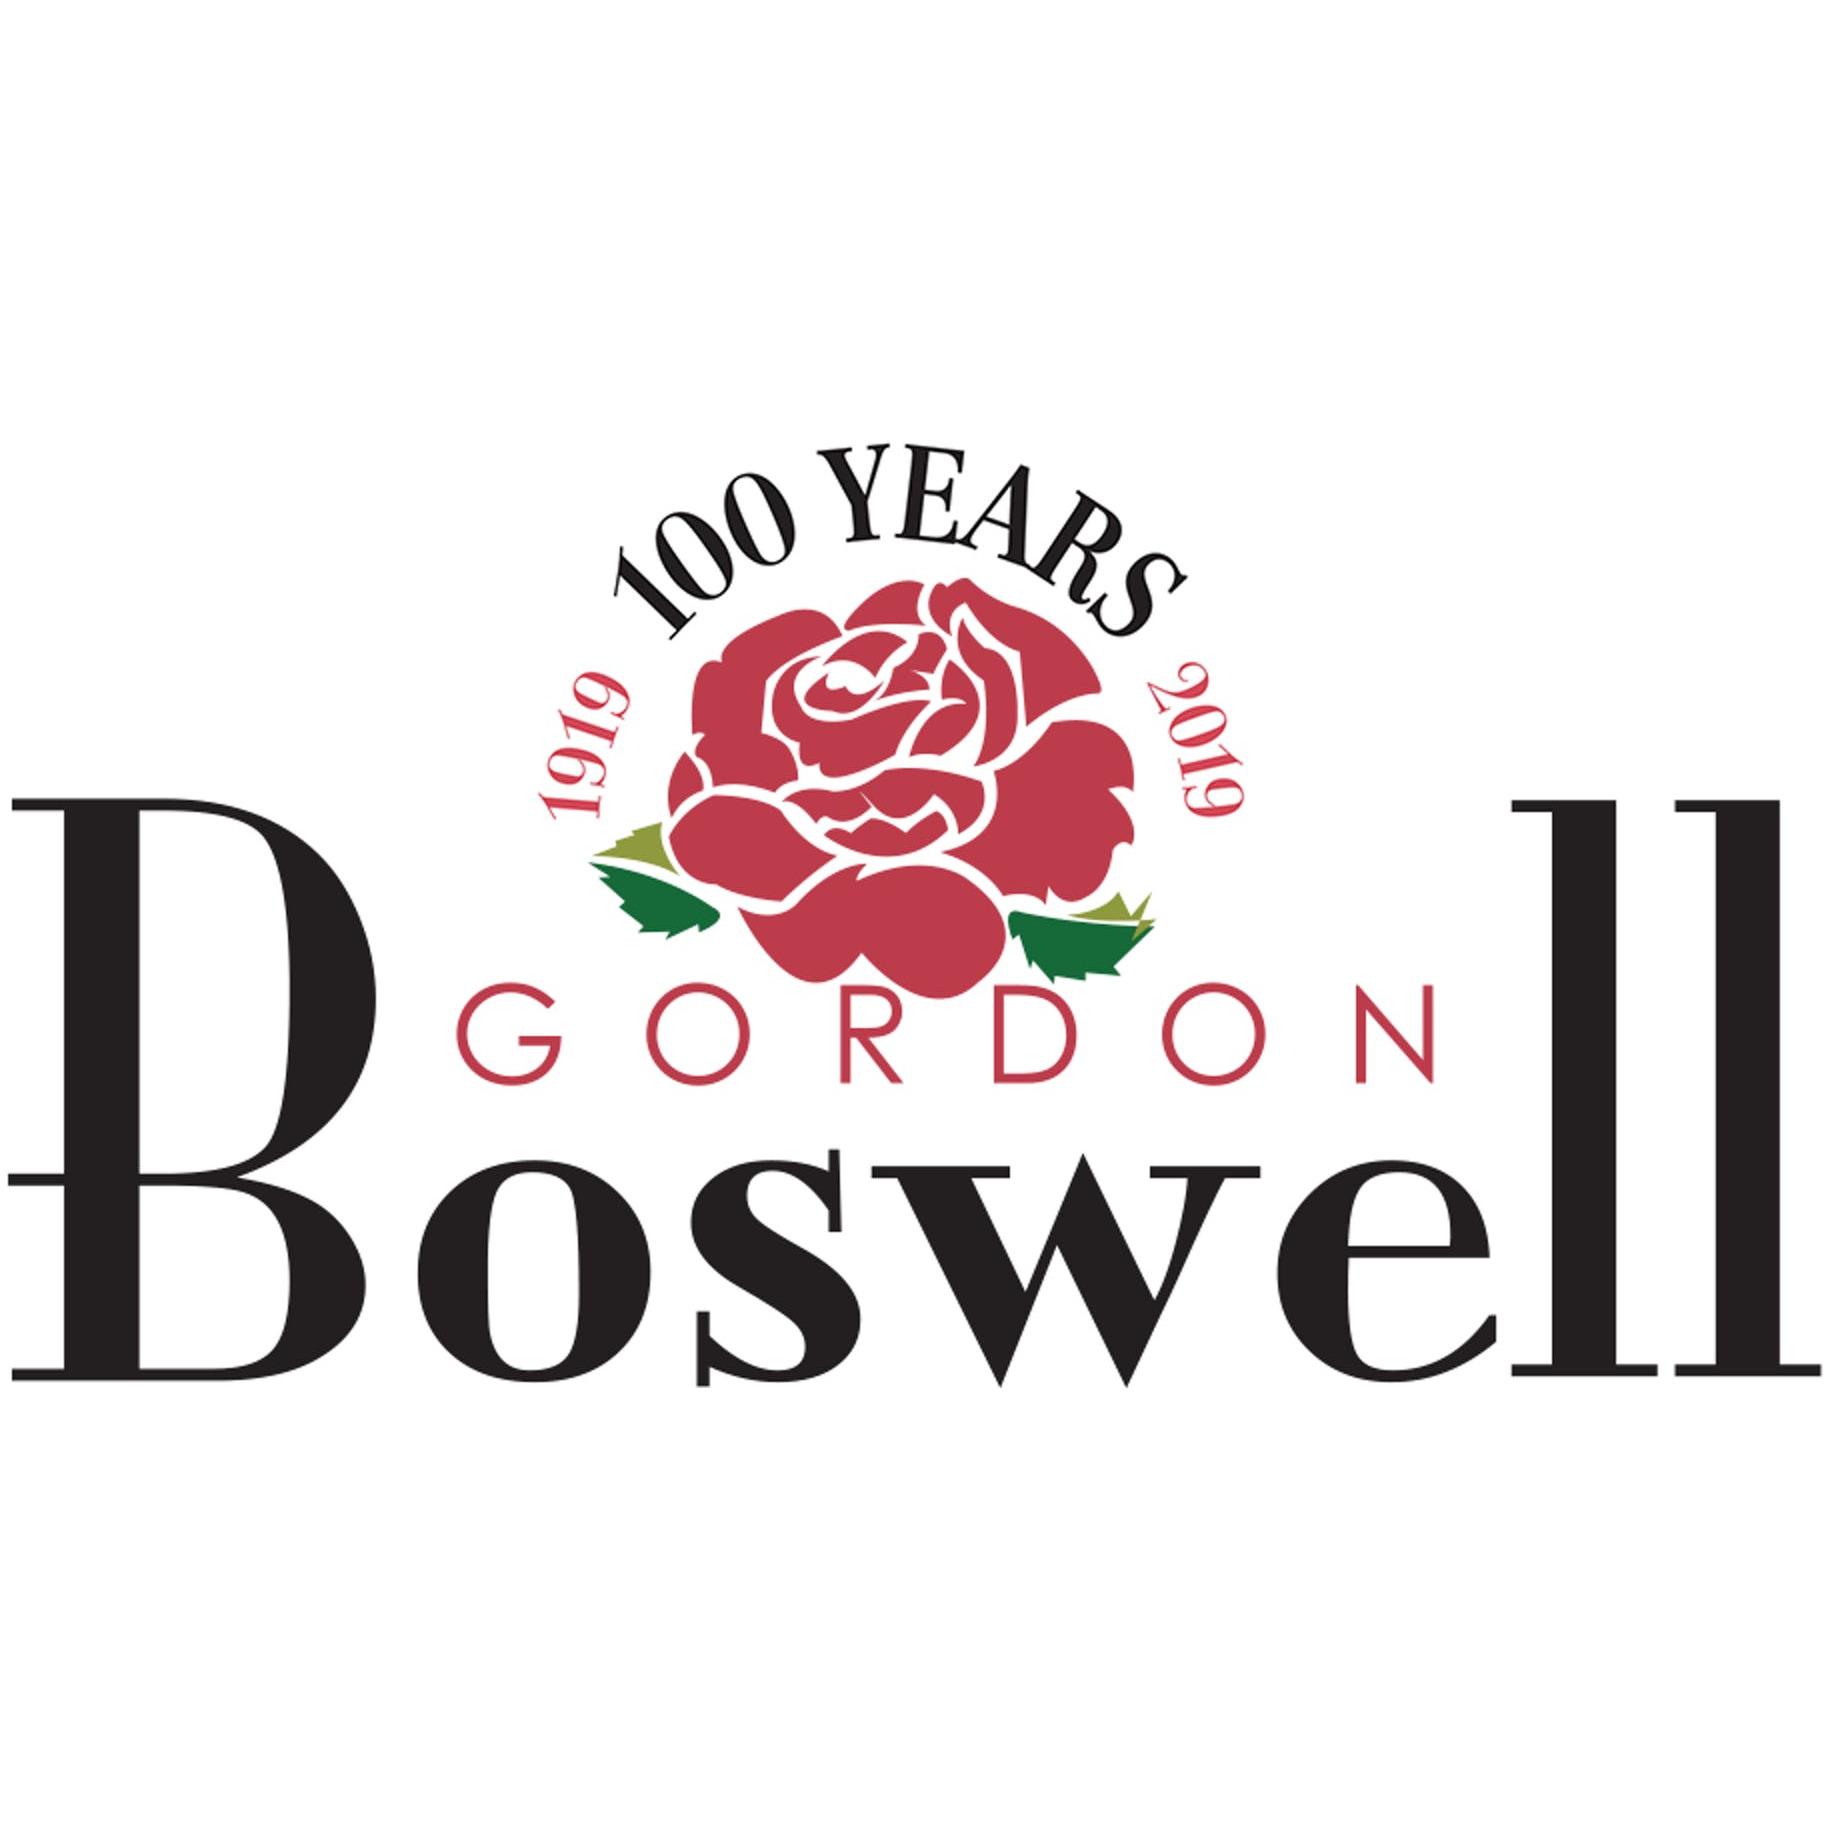 Gordon Boswell Flowers - Fort Worth, TX 76104 - (817)332-2265 | ShowMeLocal.com